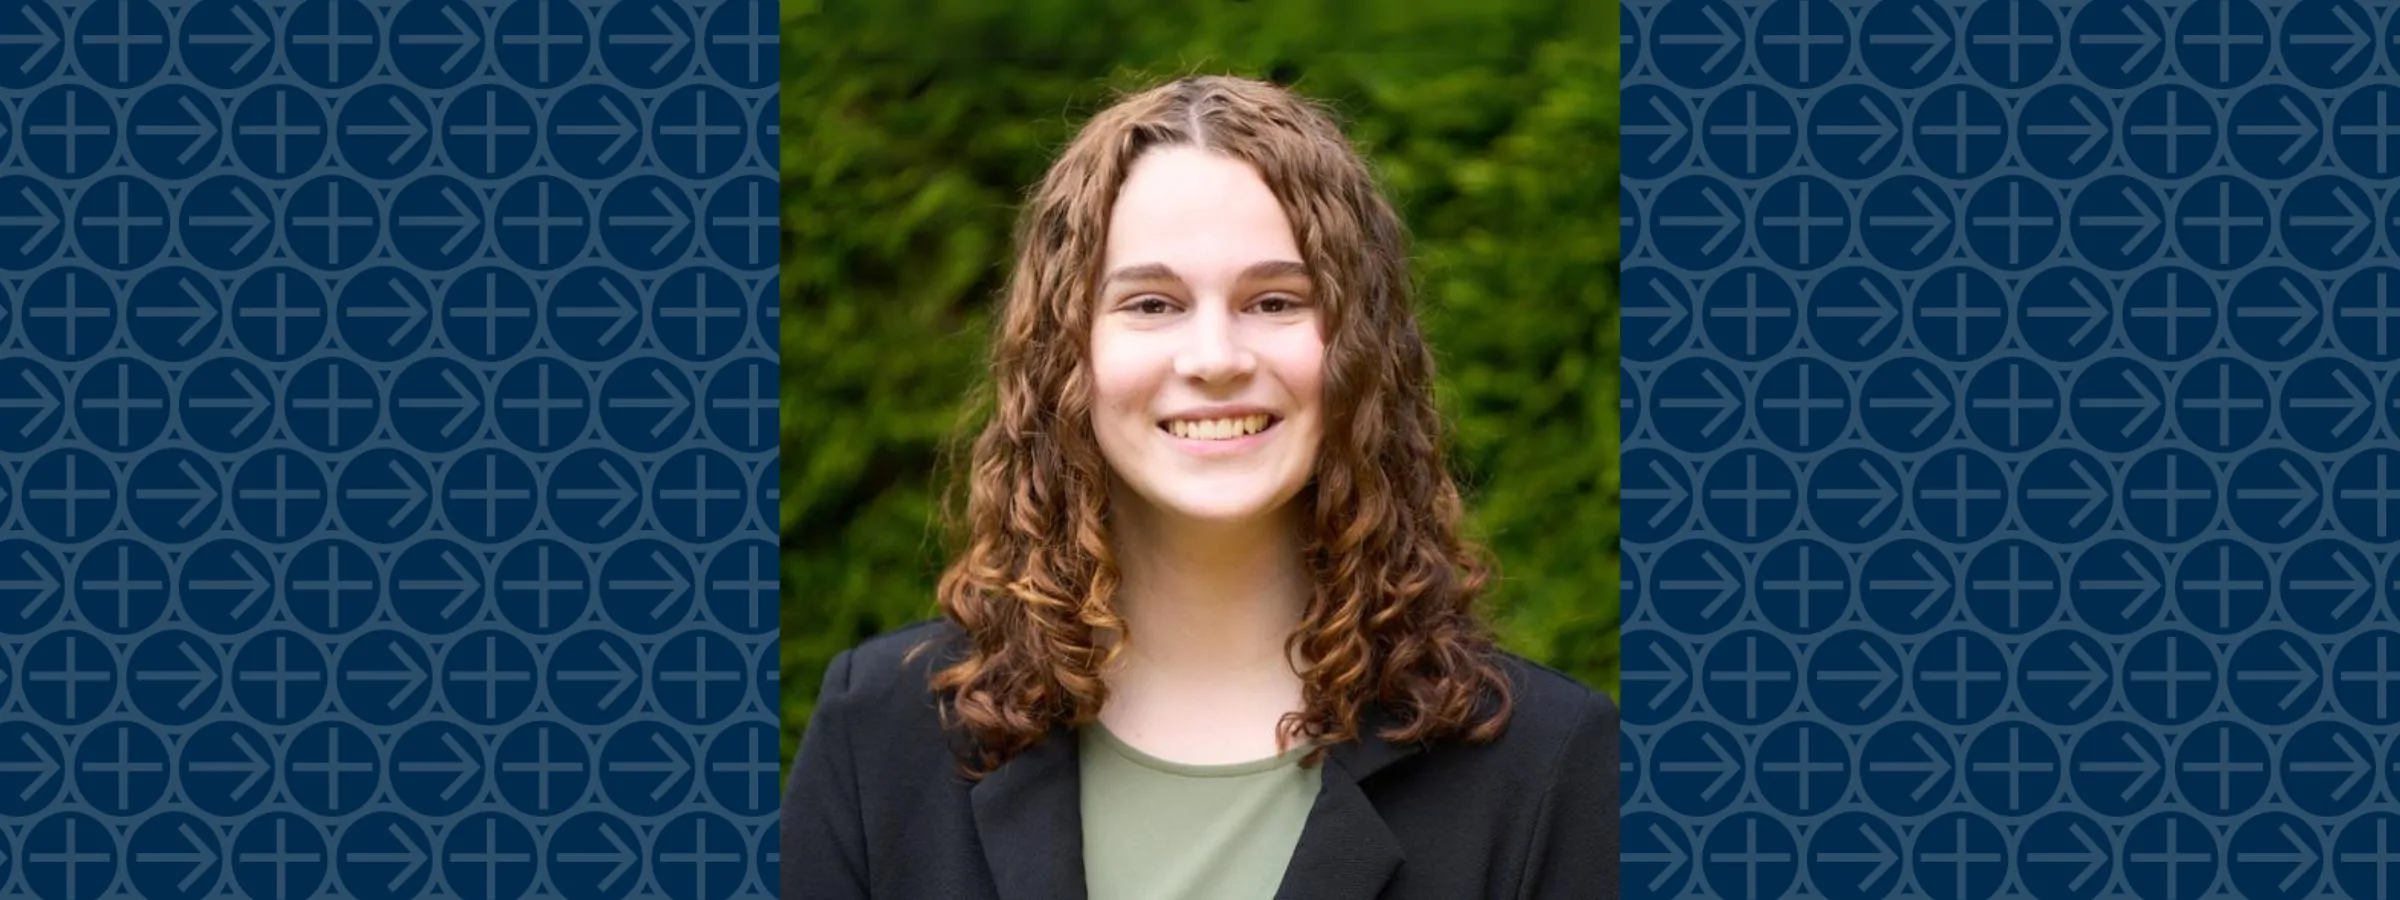 Sara Hopper, student in Master of Science in Intelligence & Security Studies (MSISS) program at LVC